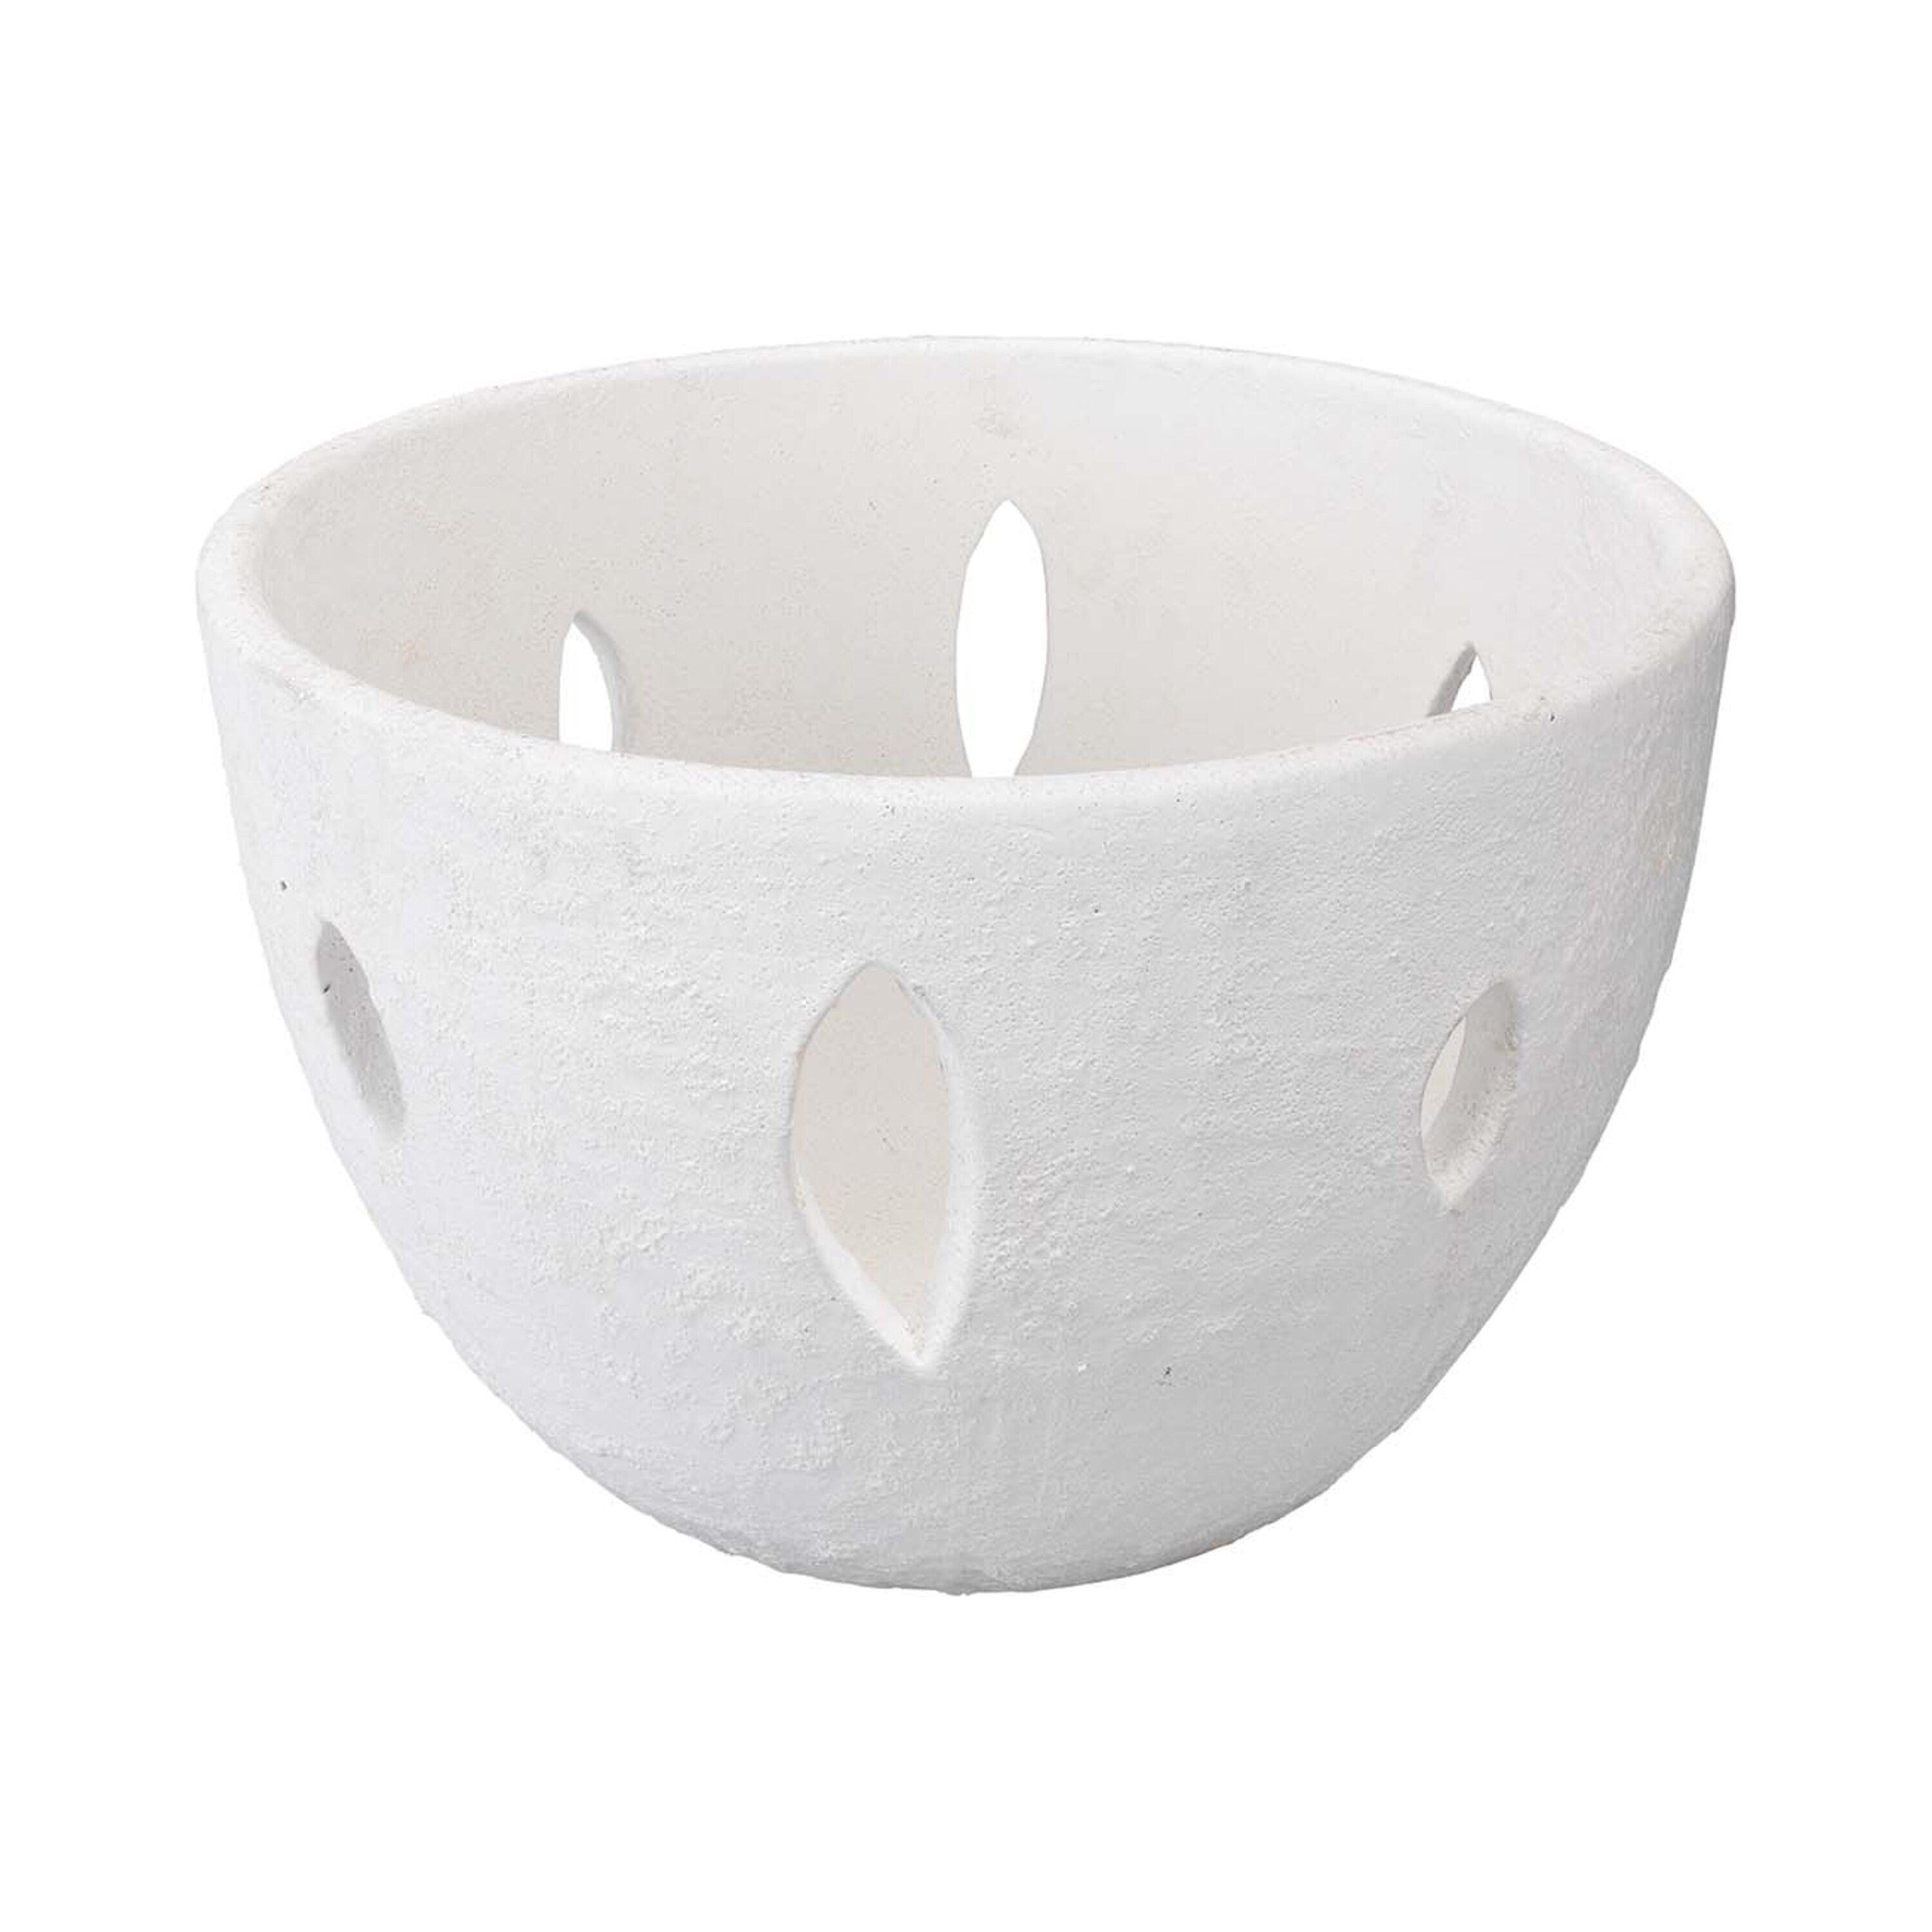 Jamie Young Company - 7LACE-BOWH - Lacerated Bowl - Lacerated - White